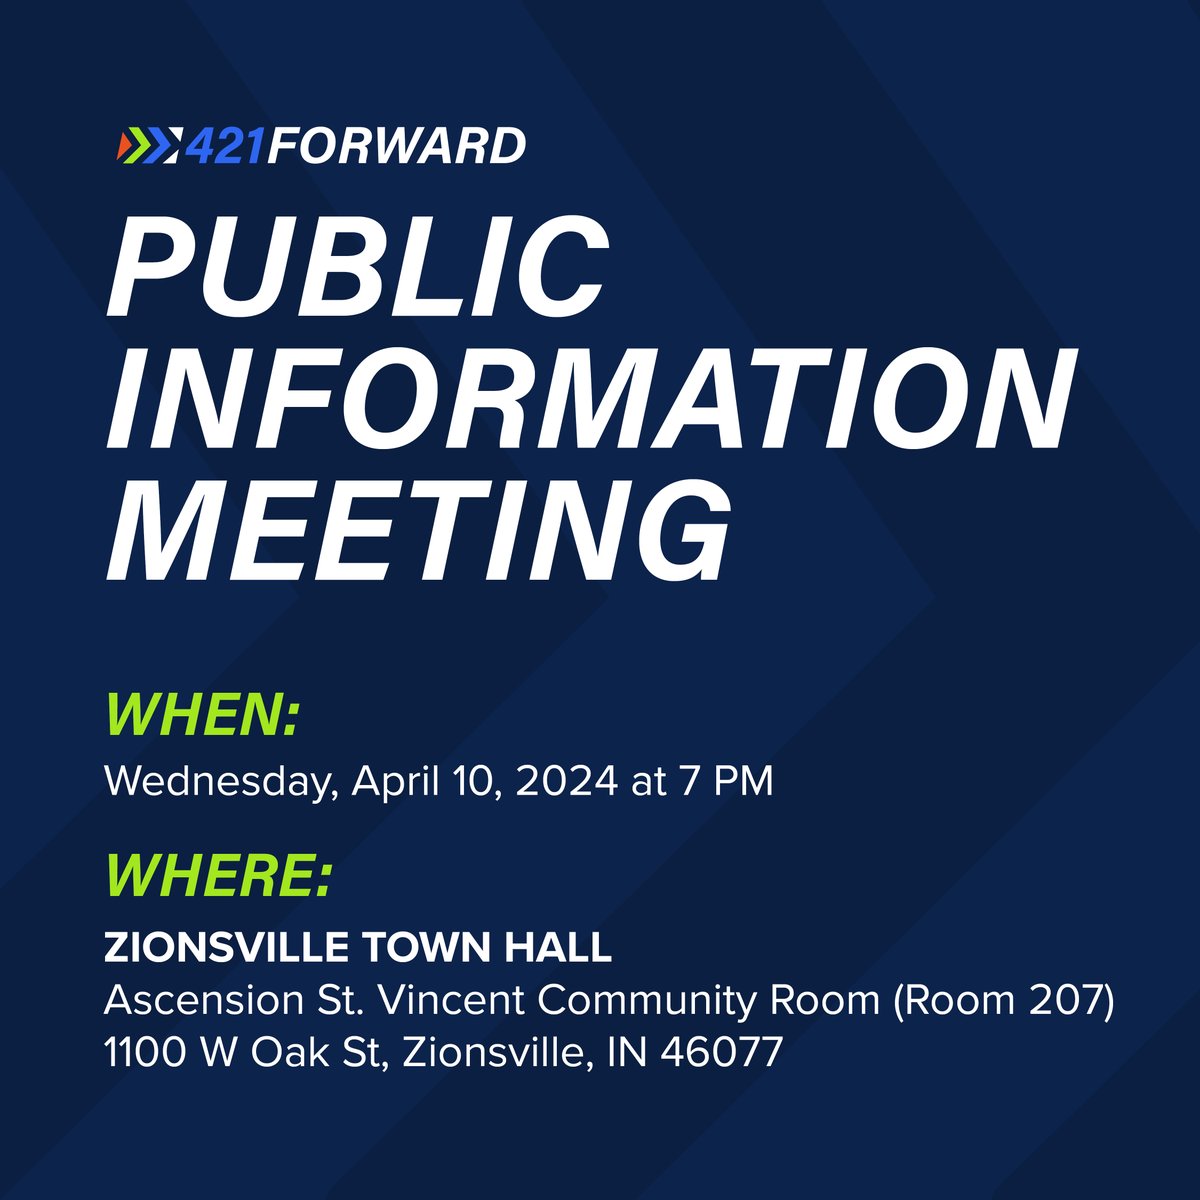 We're less than a month away from a Public Information Meeting for the 421 Forward project. Join us on April 10 at 7 p.m. at Zionsville Town Hall in the Ascension St. Vincent Community Room (Room 207) to learn more about this project or visit our website: bit.ly/432sZse